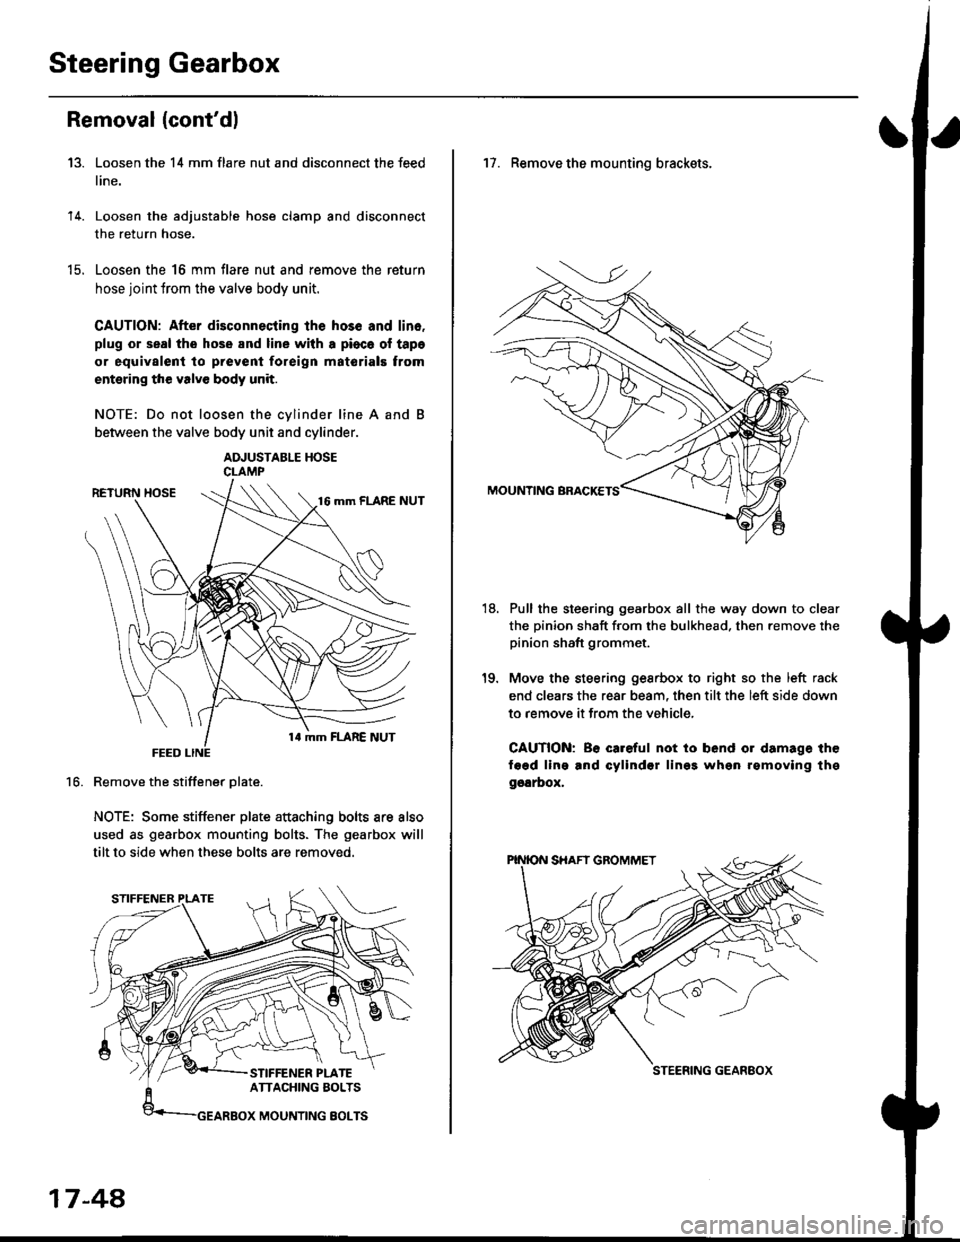 HONDA CIVIC 1997 6.G Workshop Manual Steering Gearbox
Removal {contdl
Loosen the 14 mm flare nut and disconnect the feed
line.
Loosen the adjustable hose clamp and disconnect
the return hose.
Loosen the 16 mm flare nut and remove the re